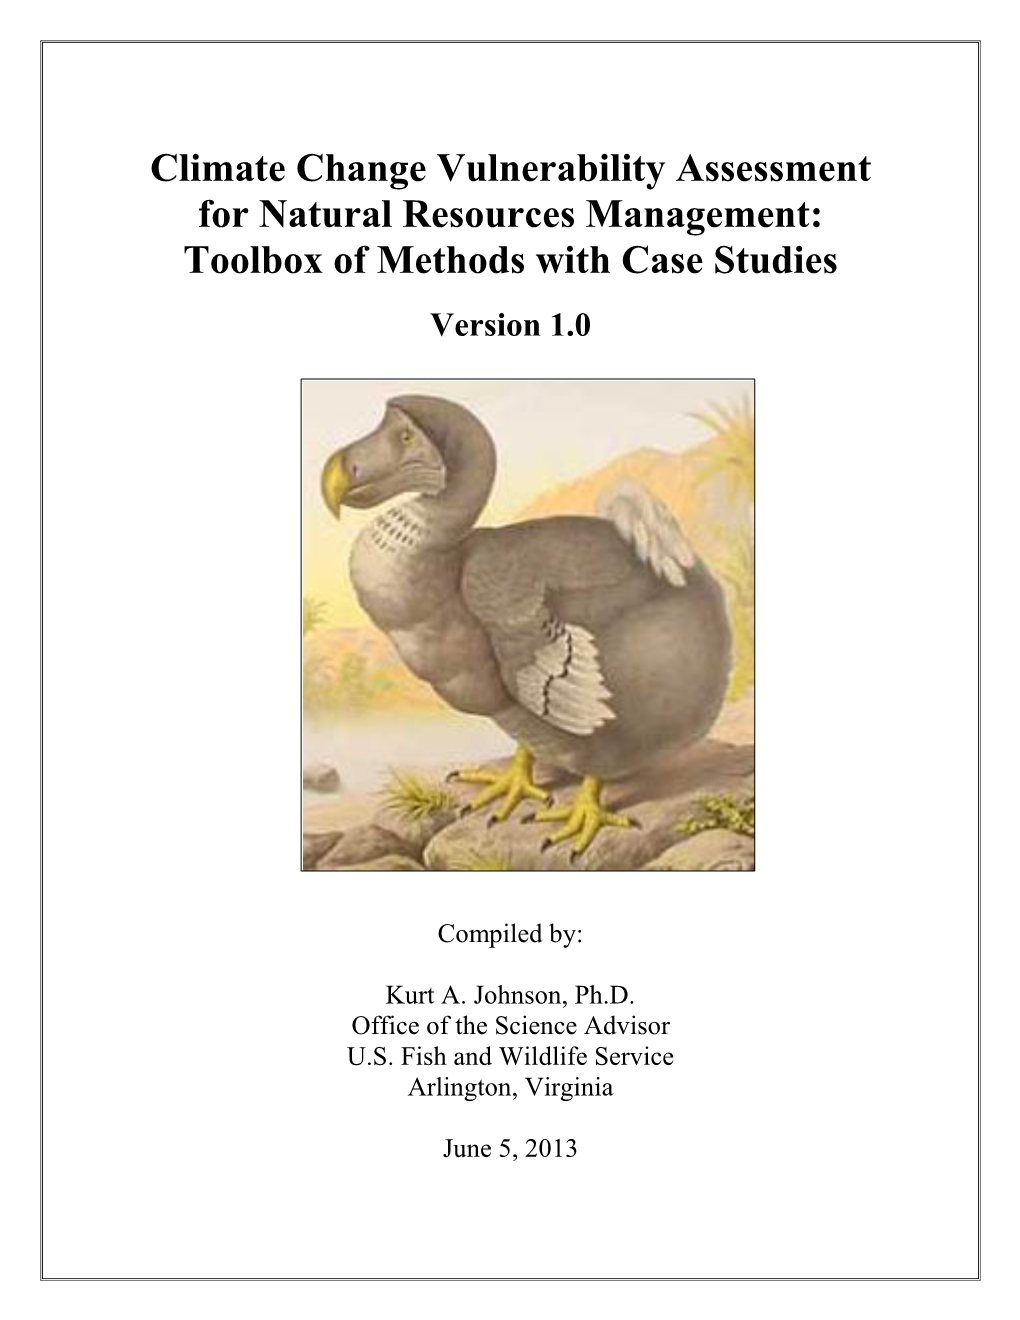 Climate Change Vulnerability Assessment for Natural Resources Management: Toolbox of Methods with Case Studies